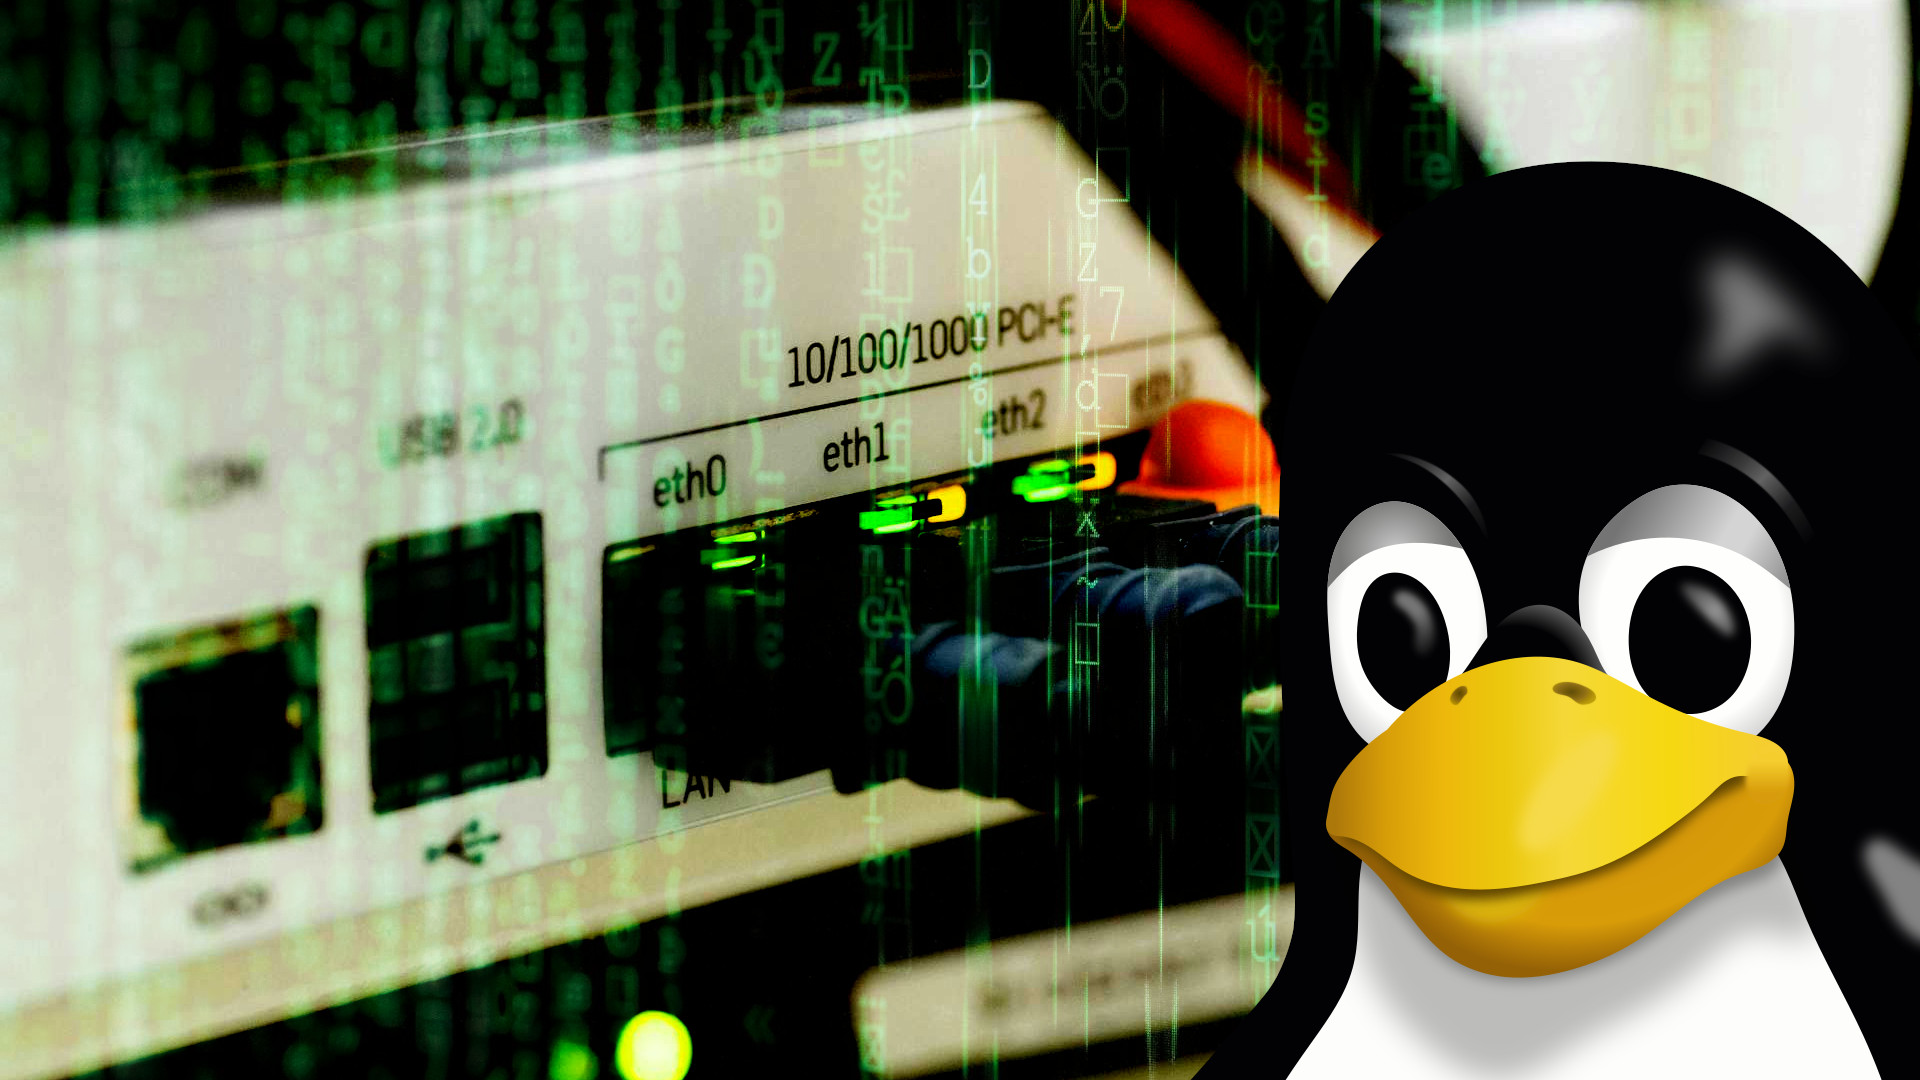 How to manage Linux network connections via the terminal